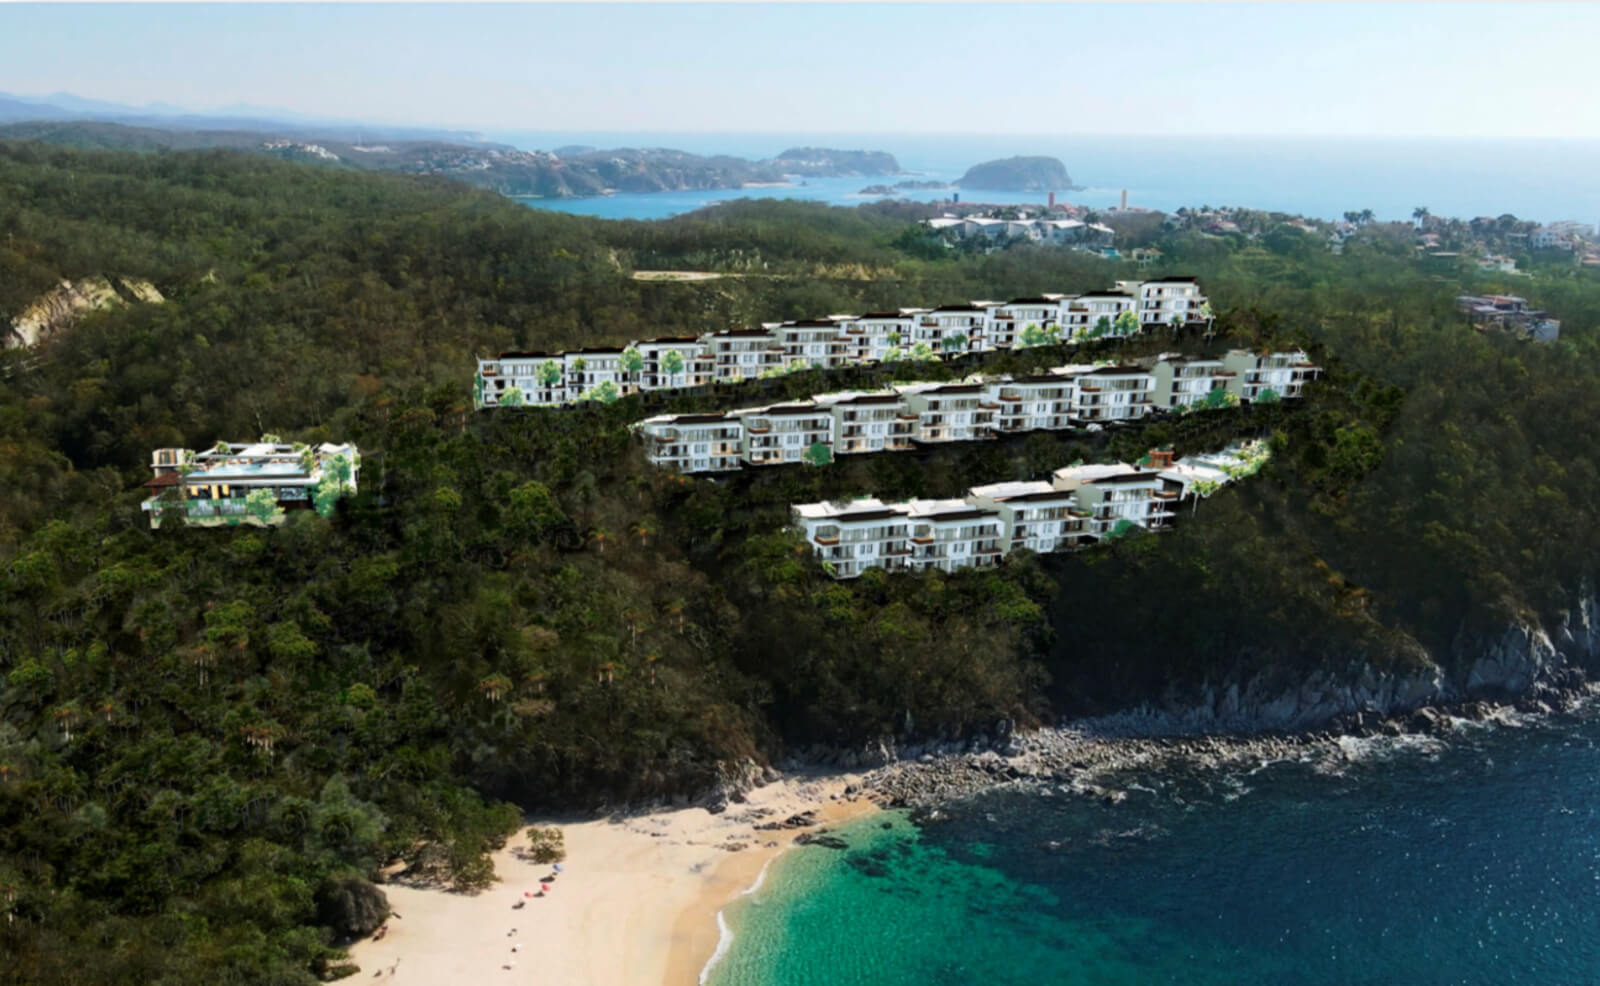 Condo with ocean view, garden, and private pool for sale in Huatulco.